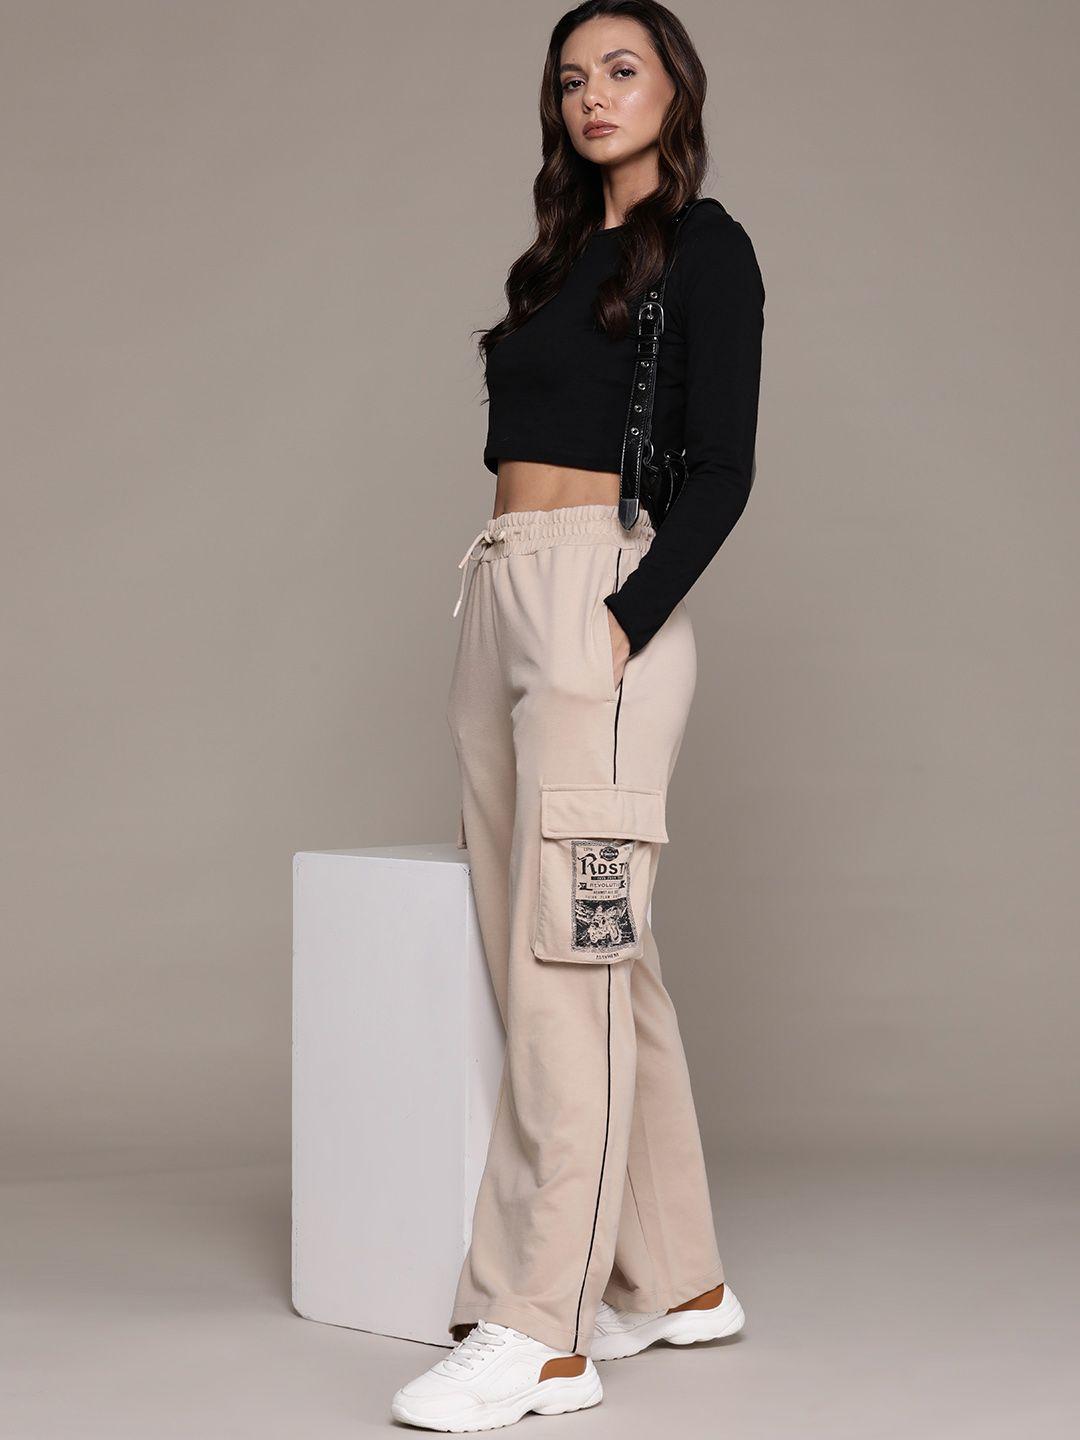 the roadster lifestyle co. women relaxed fit track pants